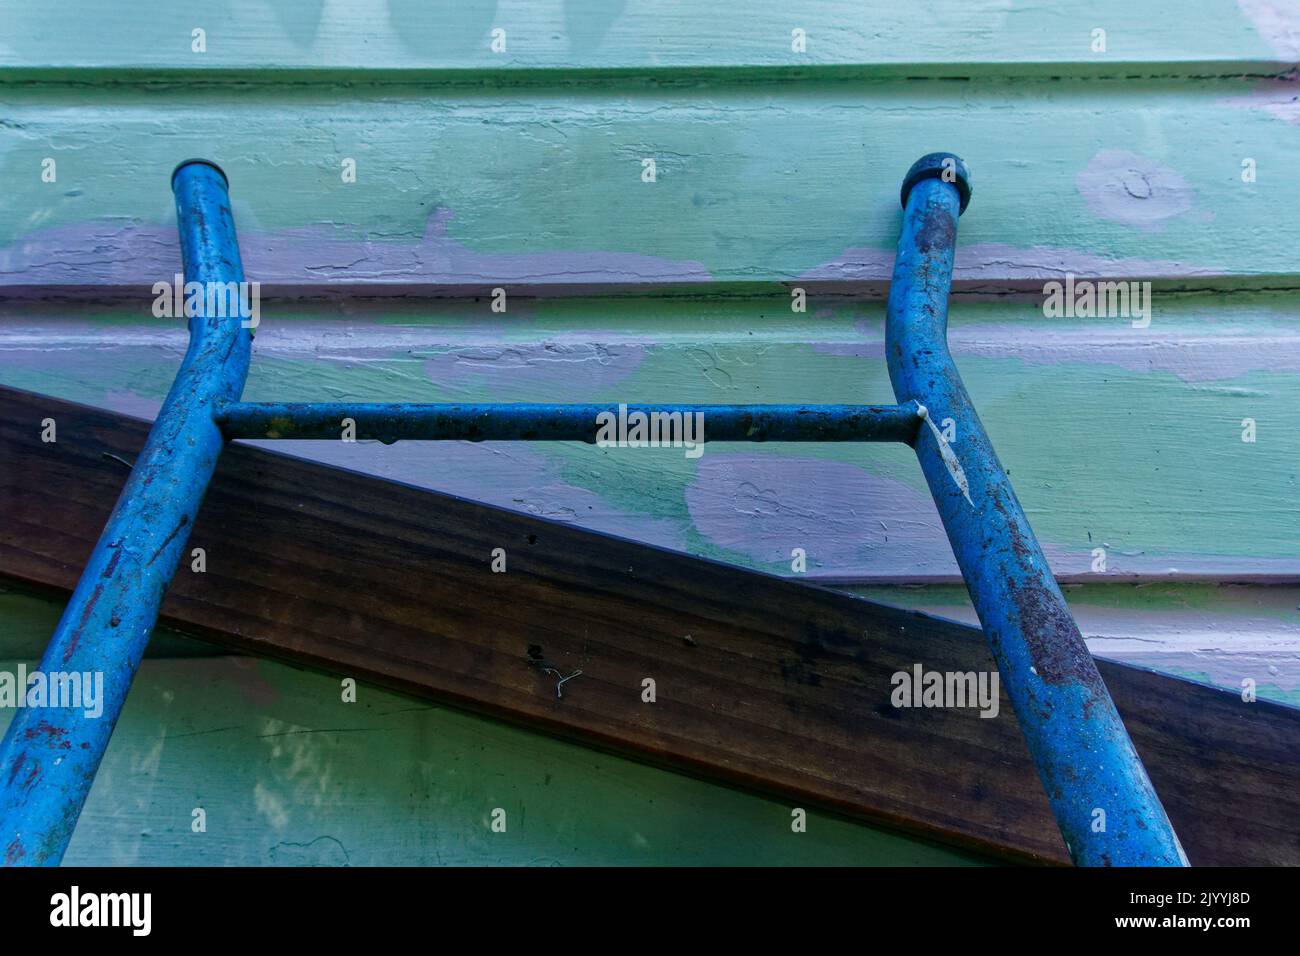 Blue ladder leaning against a weatherboard wall that has been painted with primer, renovating and maintaining an old wooden Kiwi villa or bungalow. Stock Photo